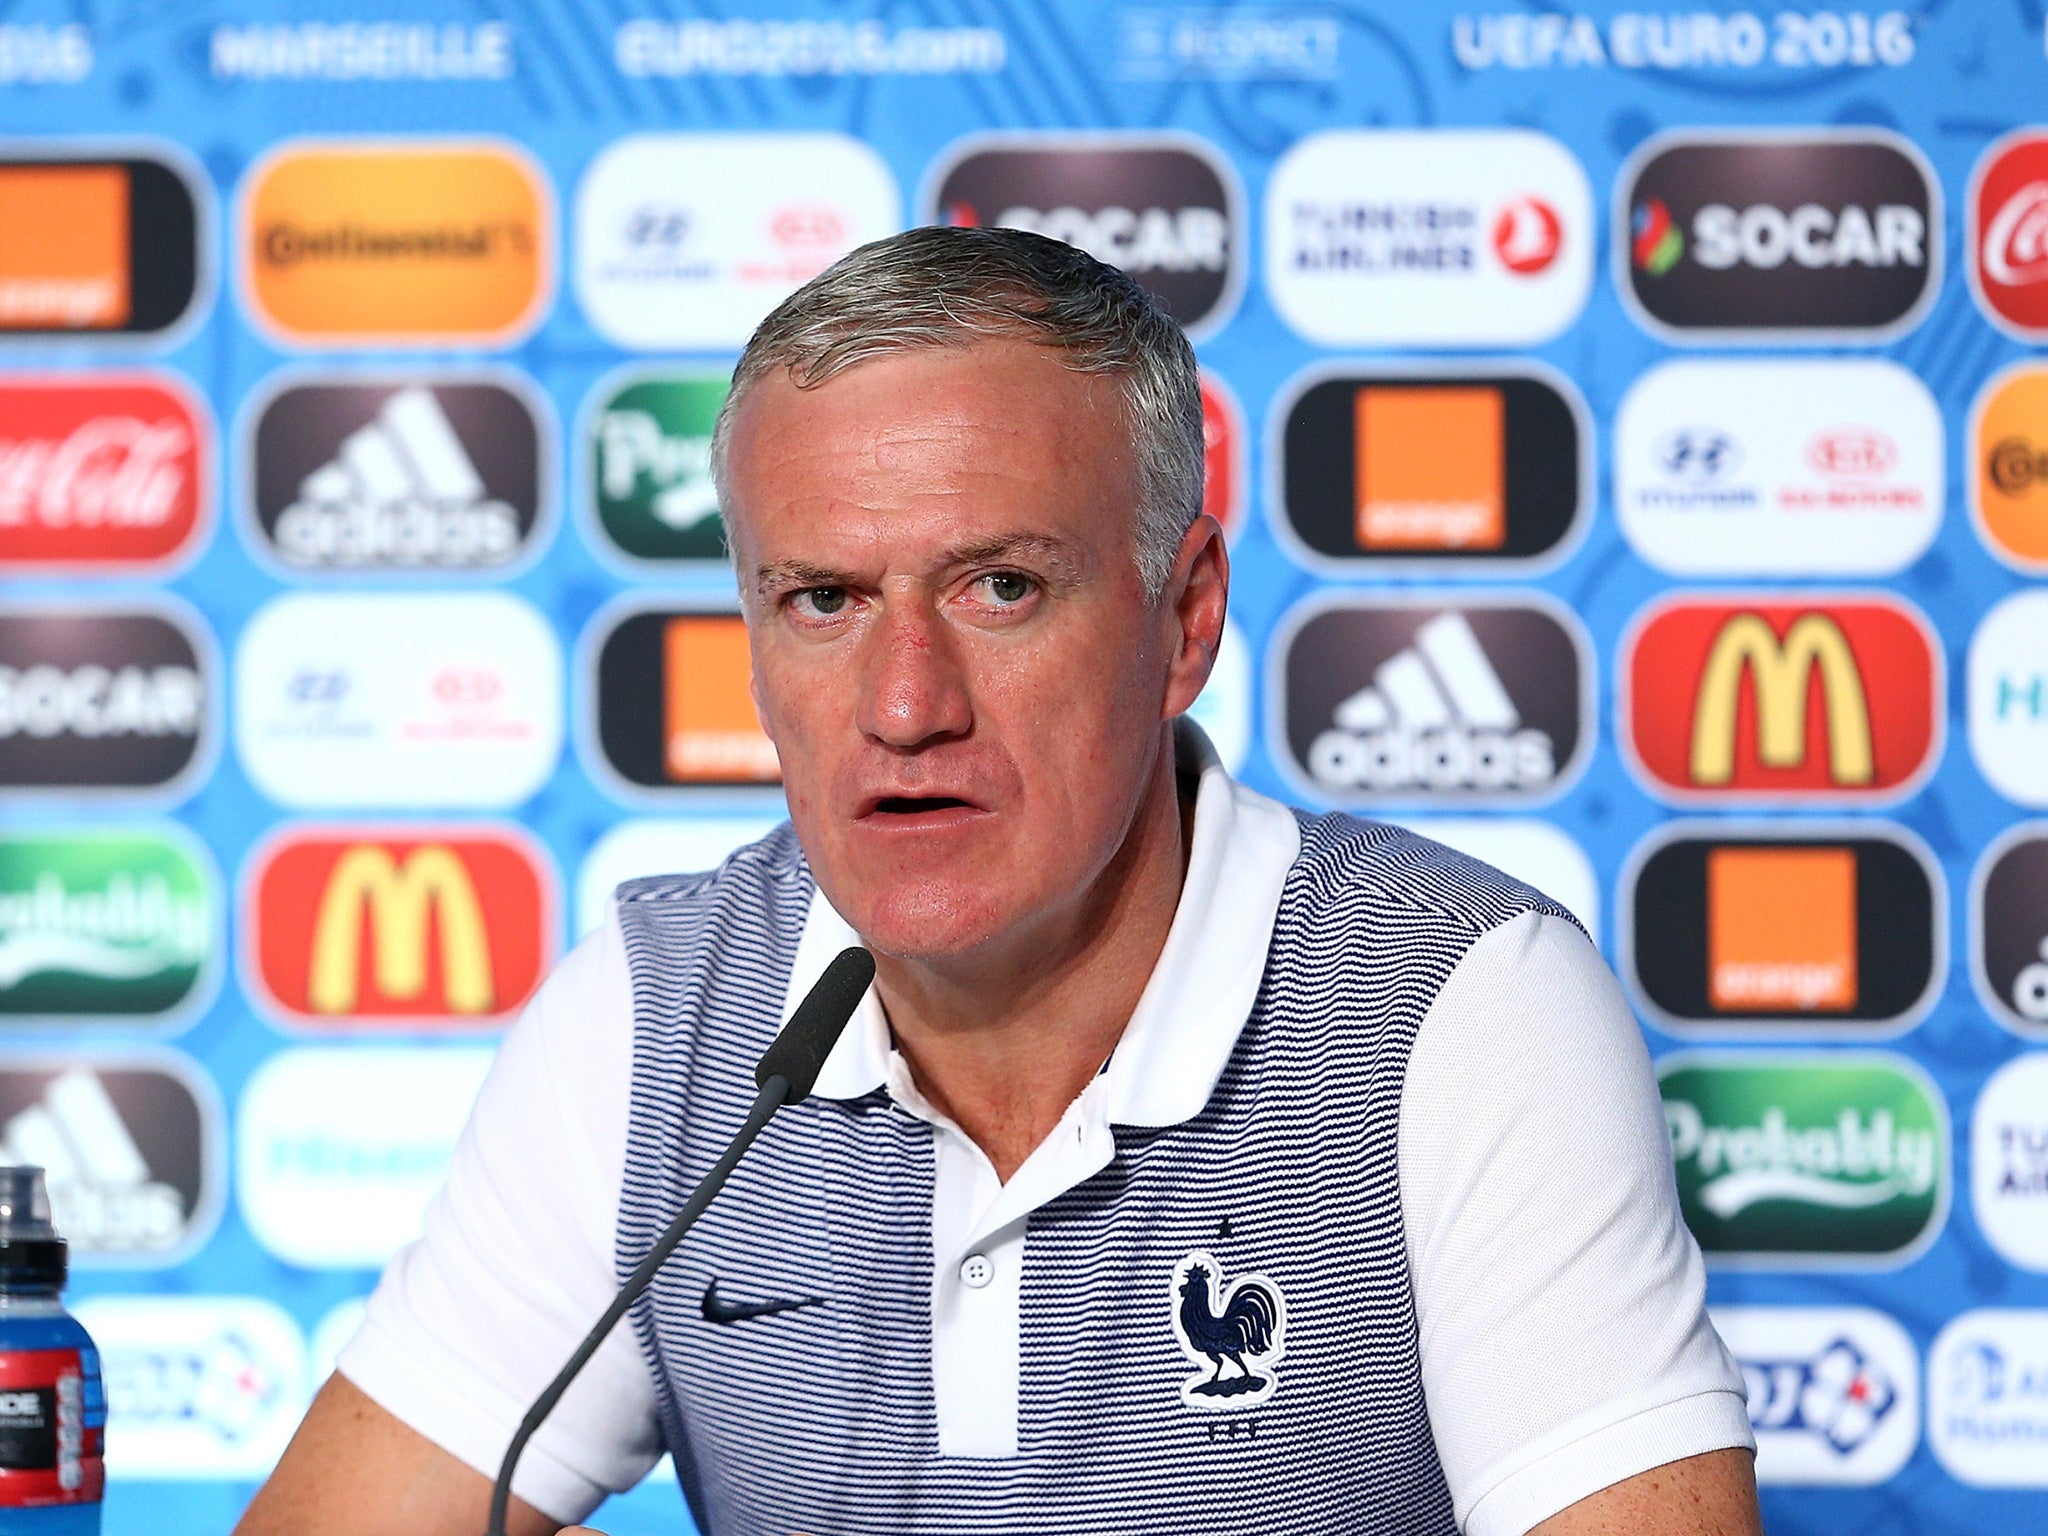 Deschamps is aware of how poor France's record is against Germany